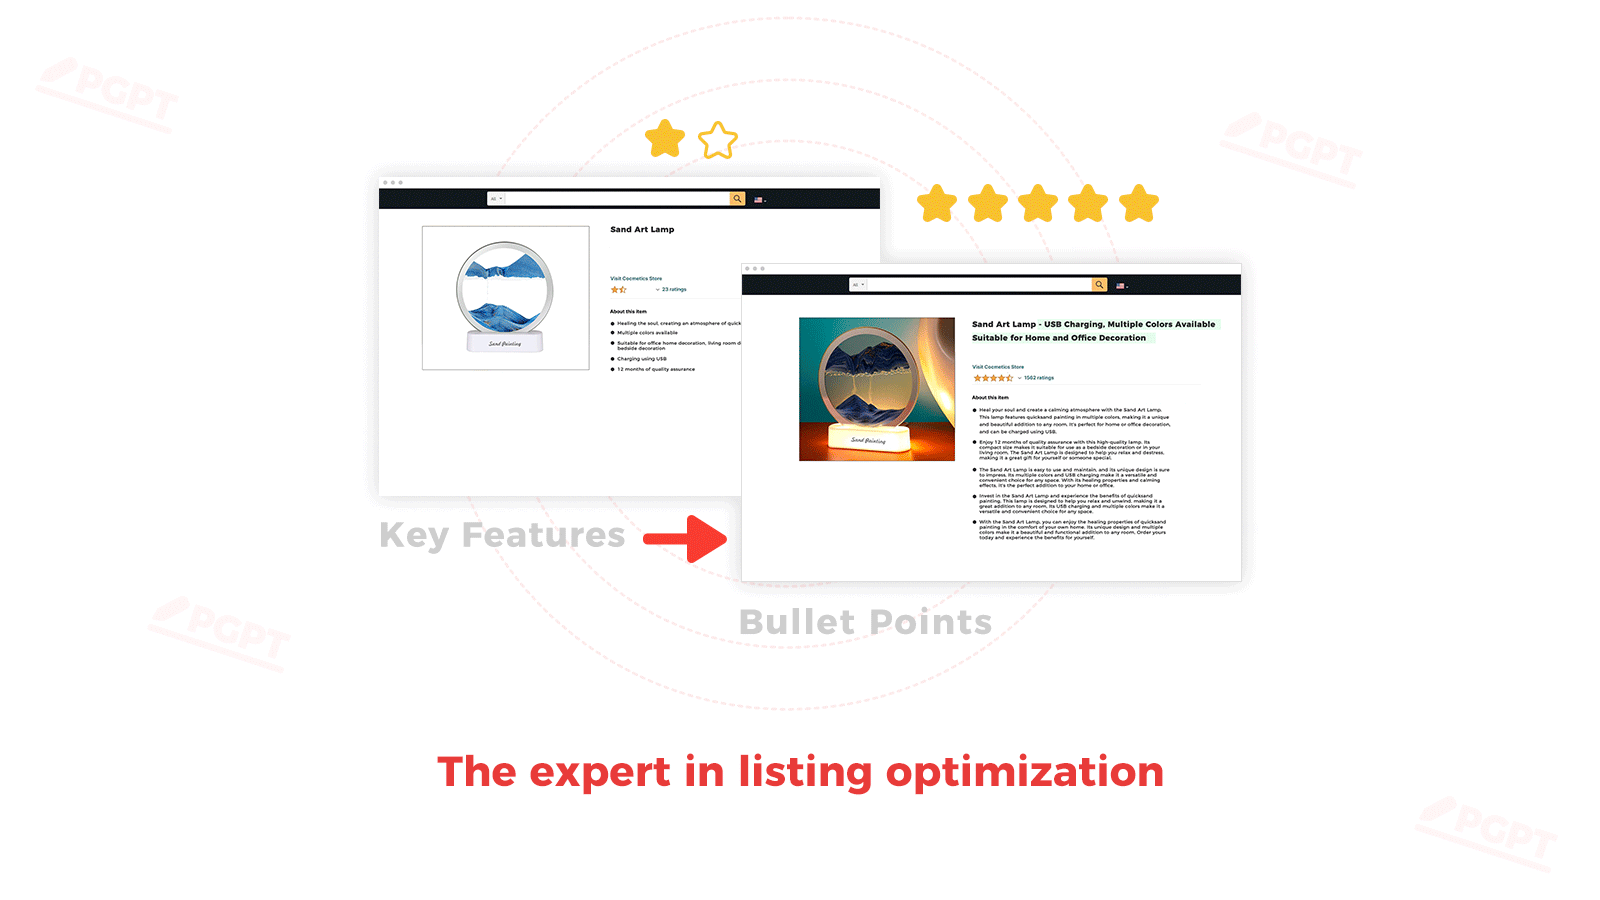 The expert in listing optimization